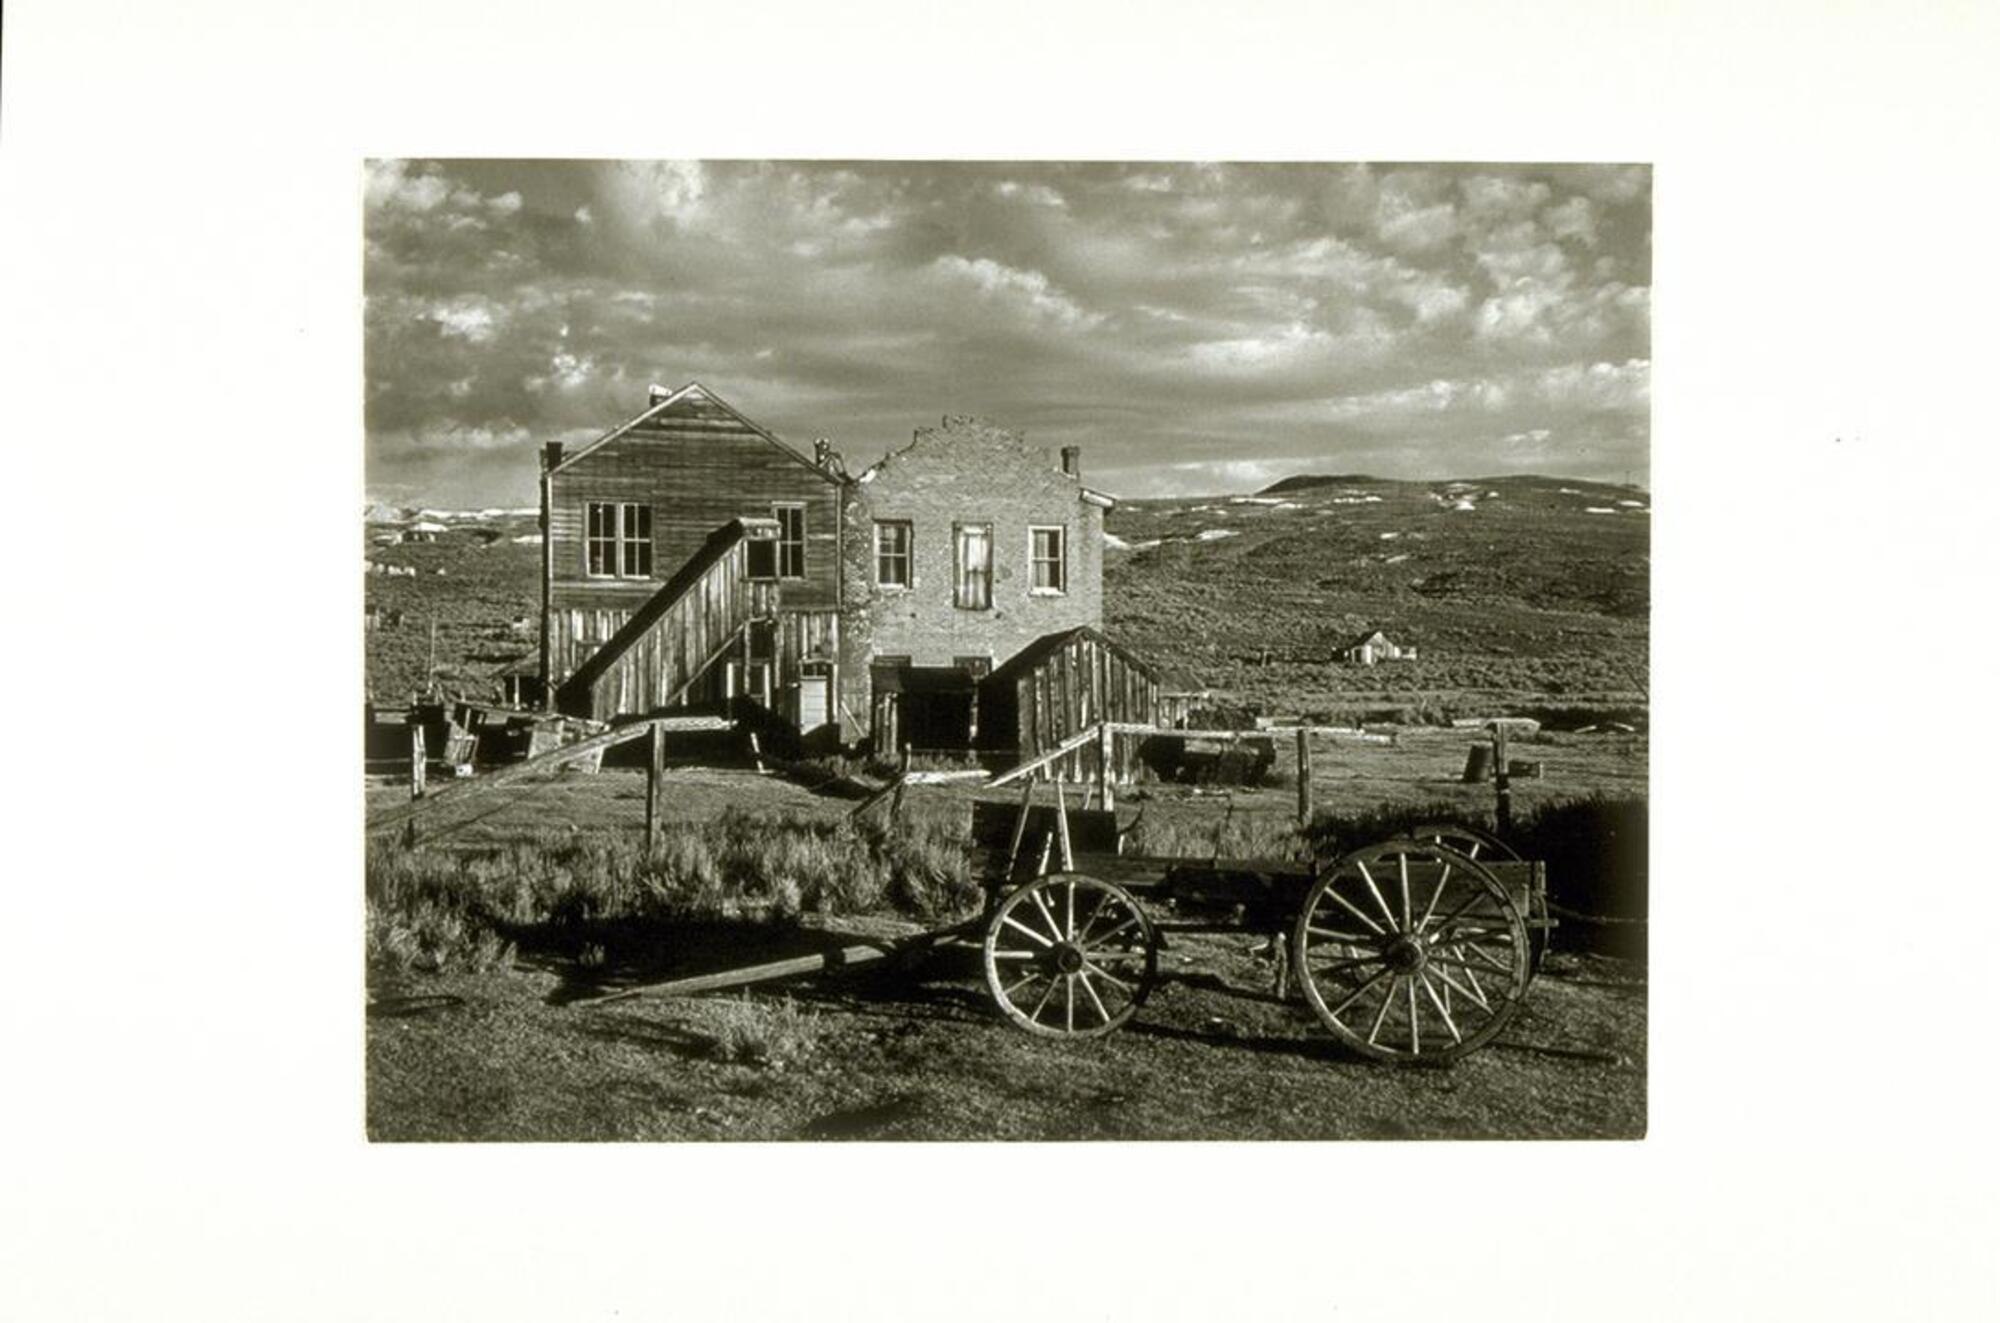 A photograph of two wooden buildings in a western landscape with a wagon in the foreground.